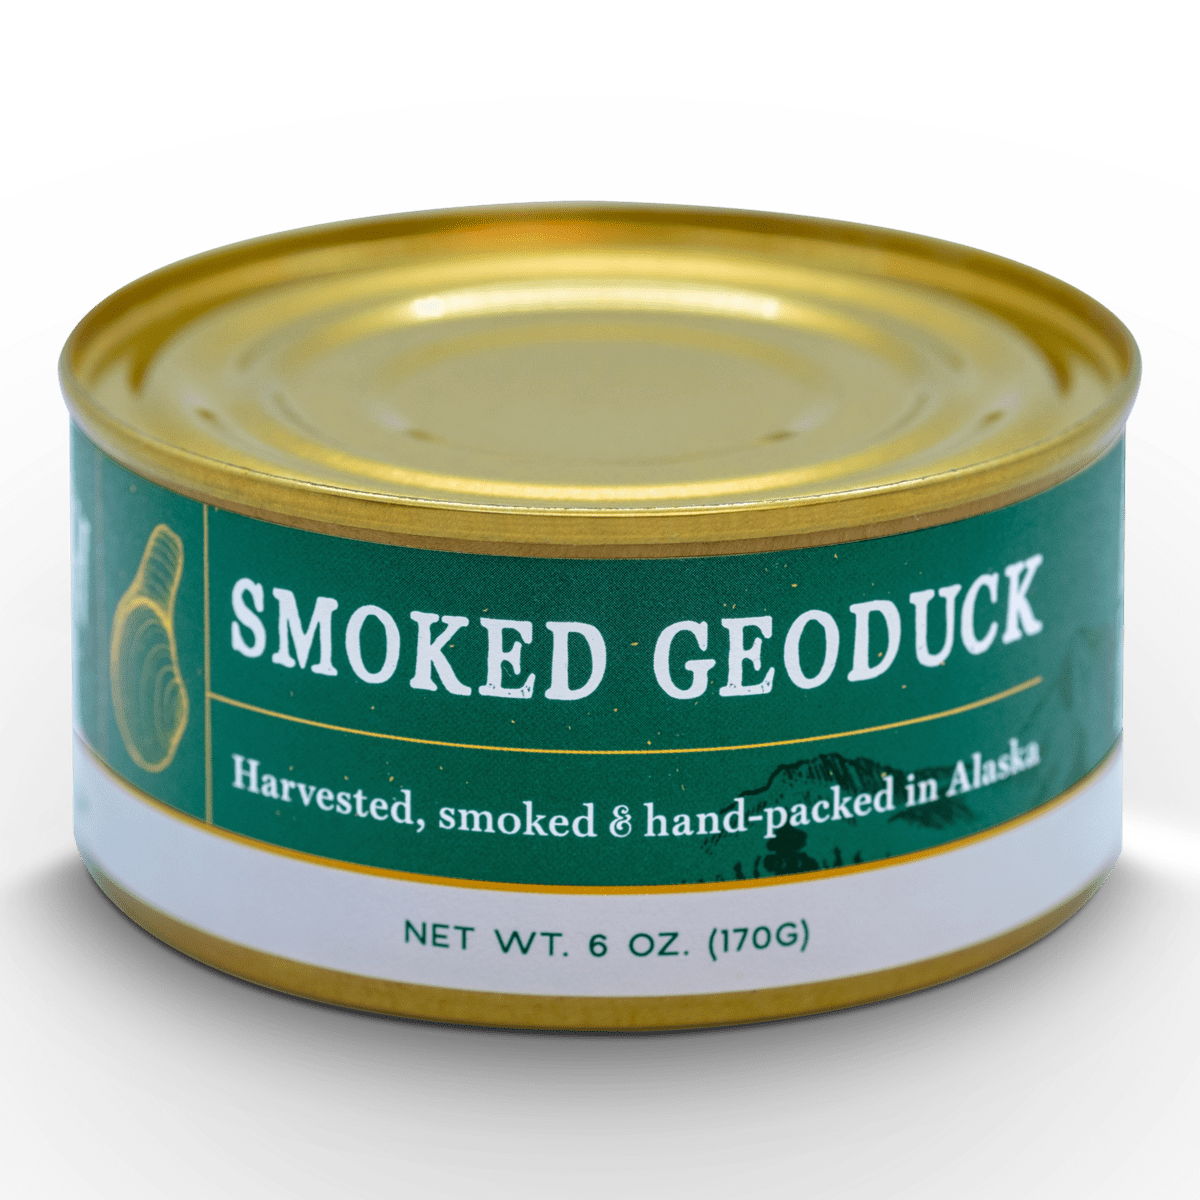 Image of a can of Smoked Geoduck from Wildfish Cannery